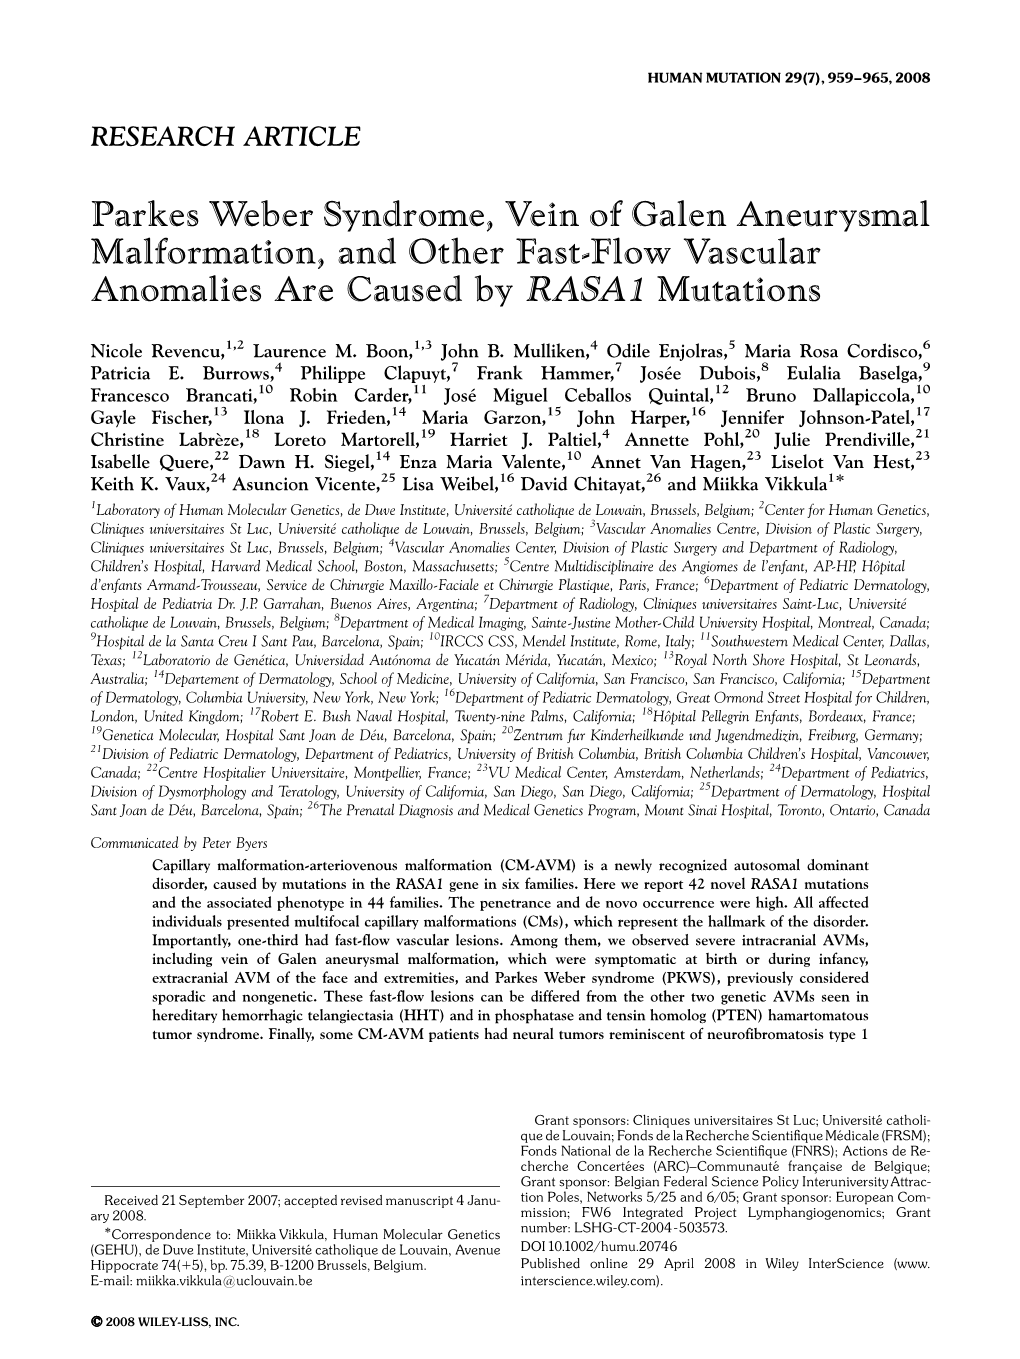 Parkes Weber Syndrome, Vein of Galen Aneurysmal Malformation, and Other Fast-Flow Vascular Anomalies Are Caused by RASA1 Mutations